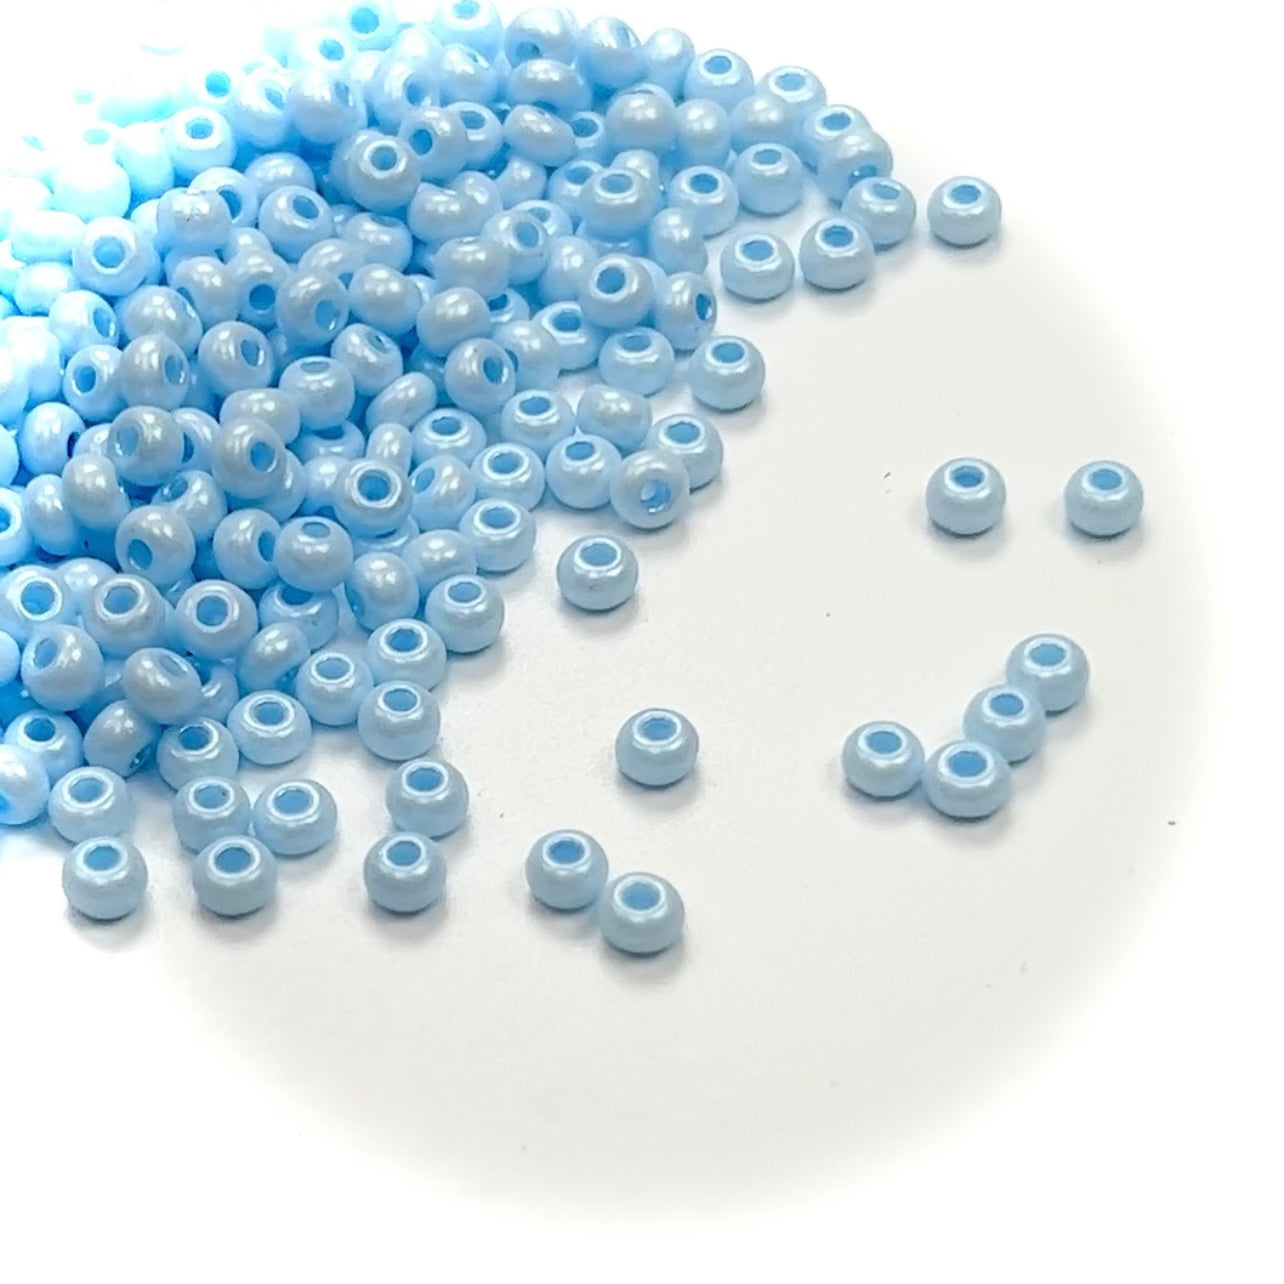 Rocailles size 6/0 (4mm) Baby Blue Dyed, Preciosa Ornela Traditional Czech Glass Seed Beads, 30grams (1 oz), P957